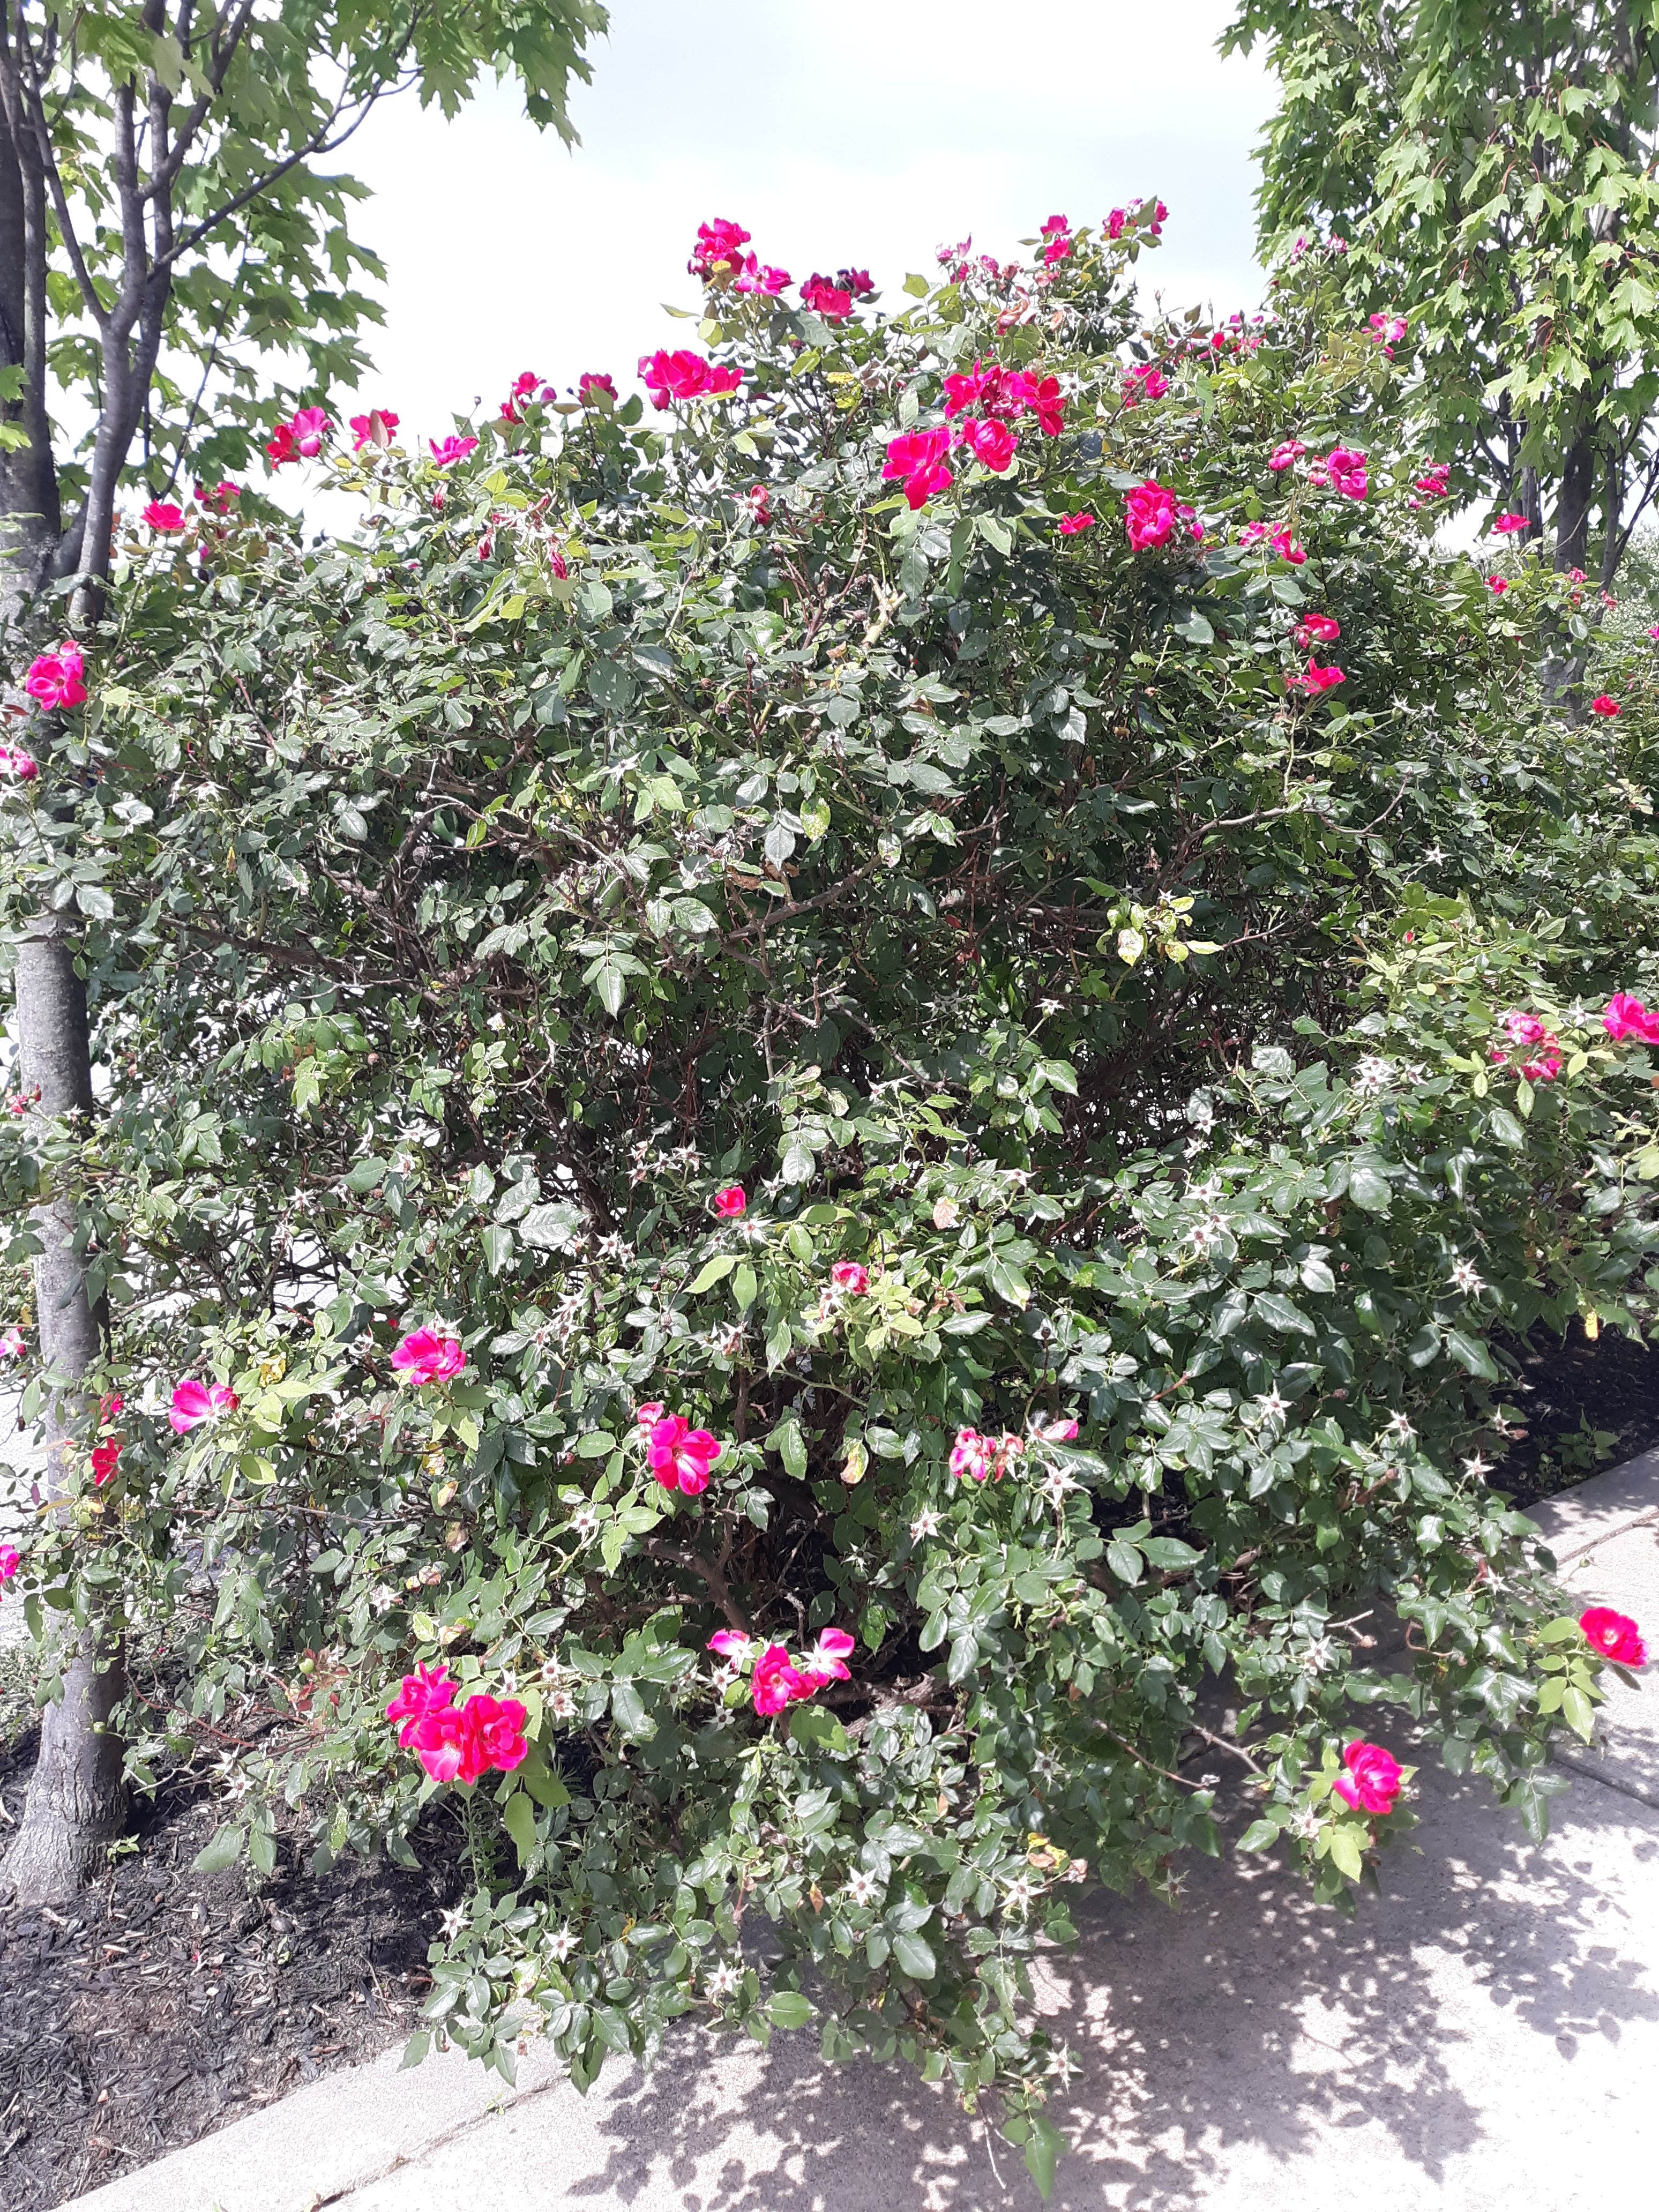 roses outside museum in Allentown